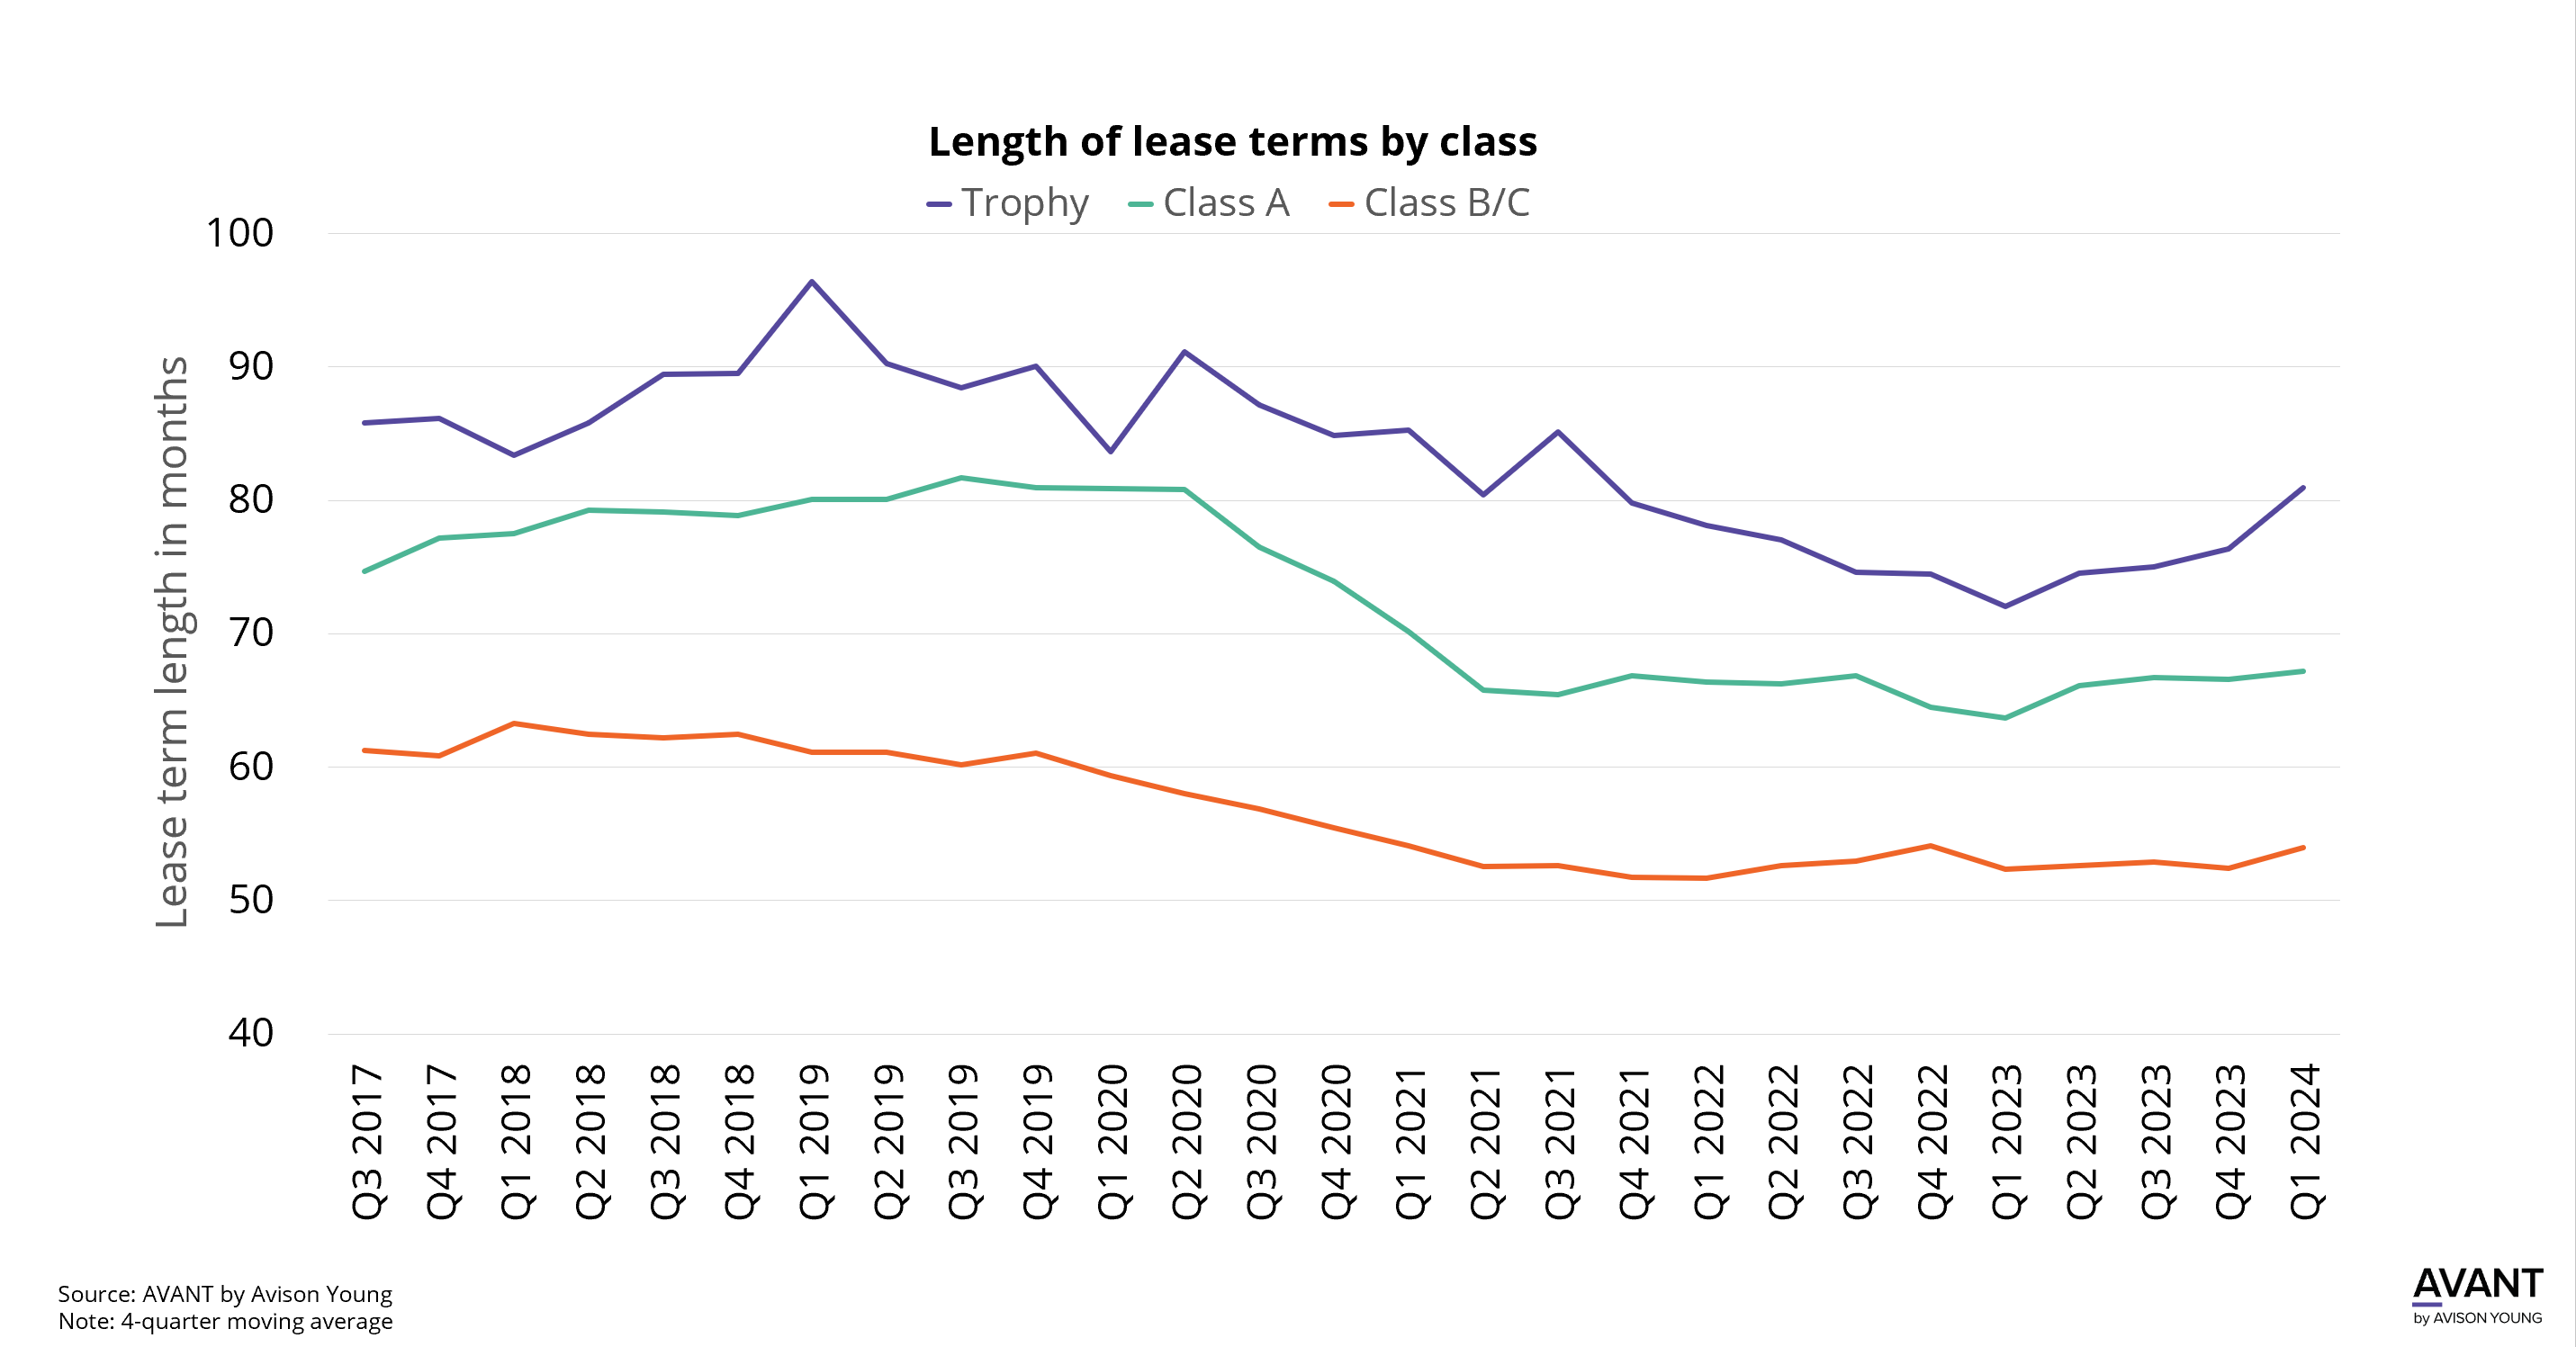 Length of lease terms by class